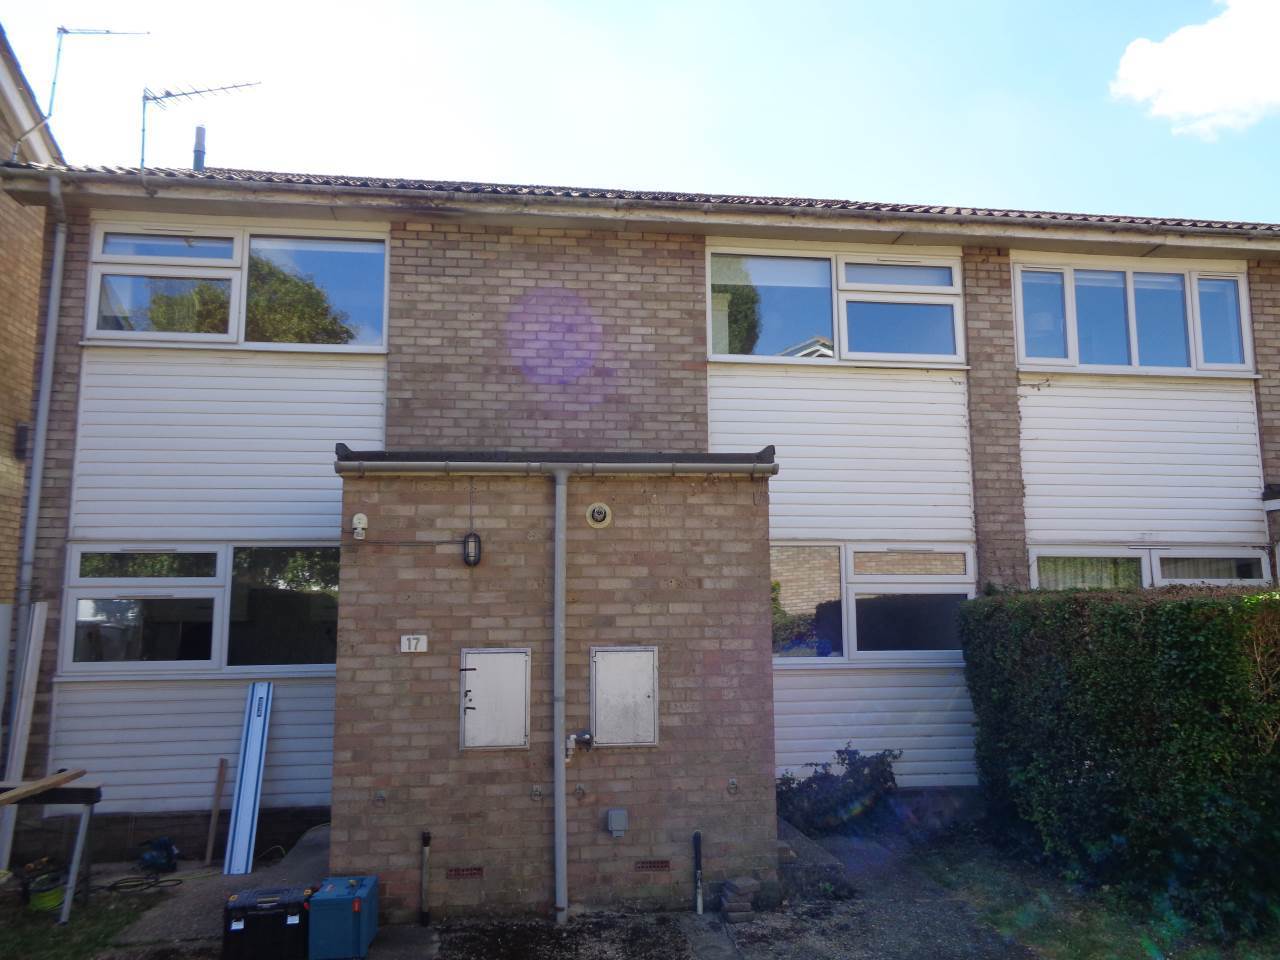 2 bed Flat for rent in Fen Ditton. From Lets Rent Cambridge